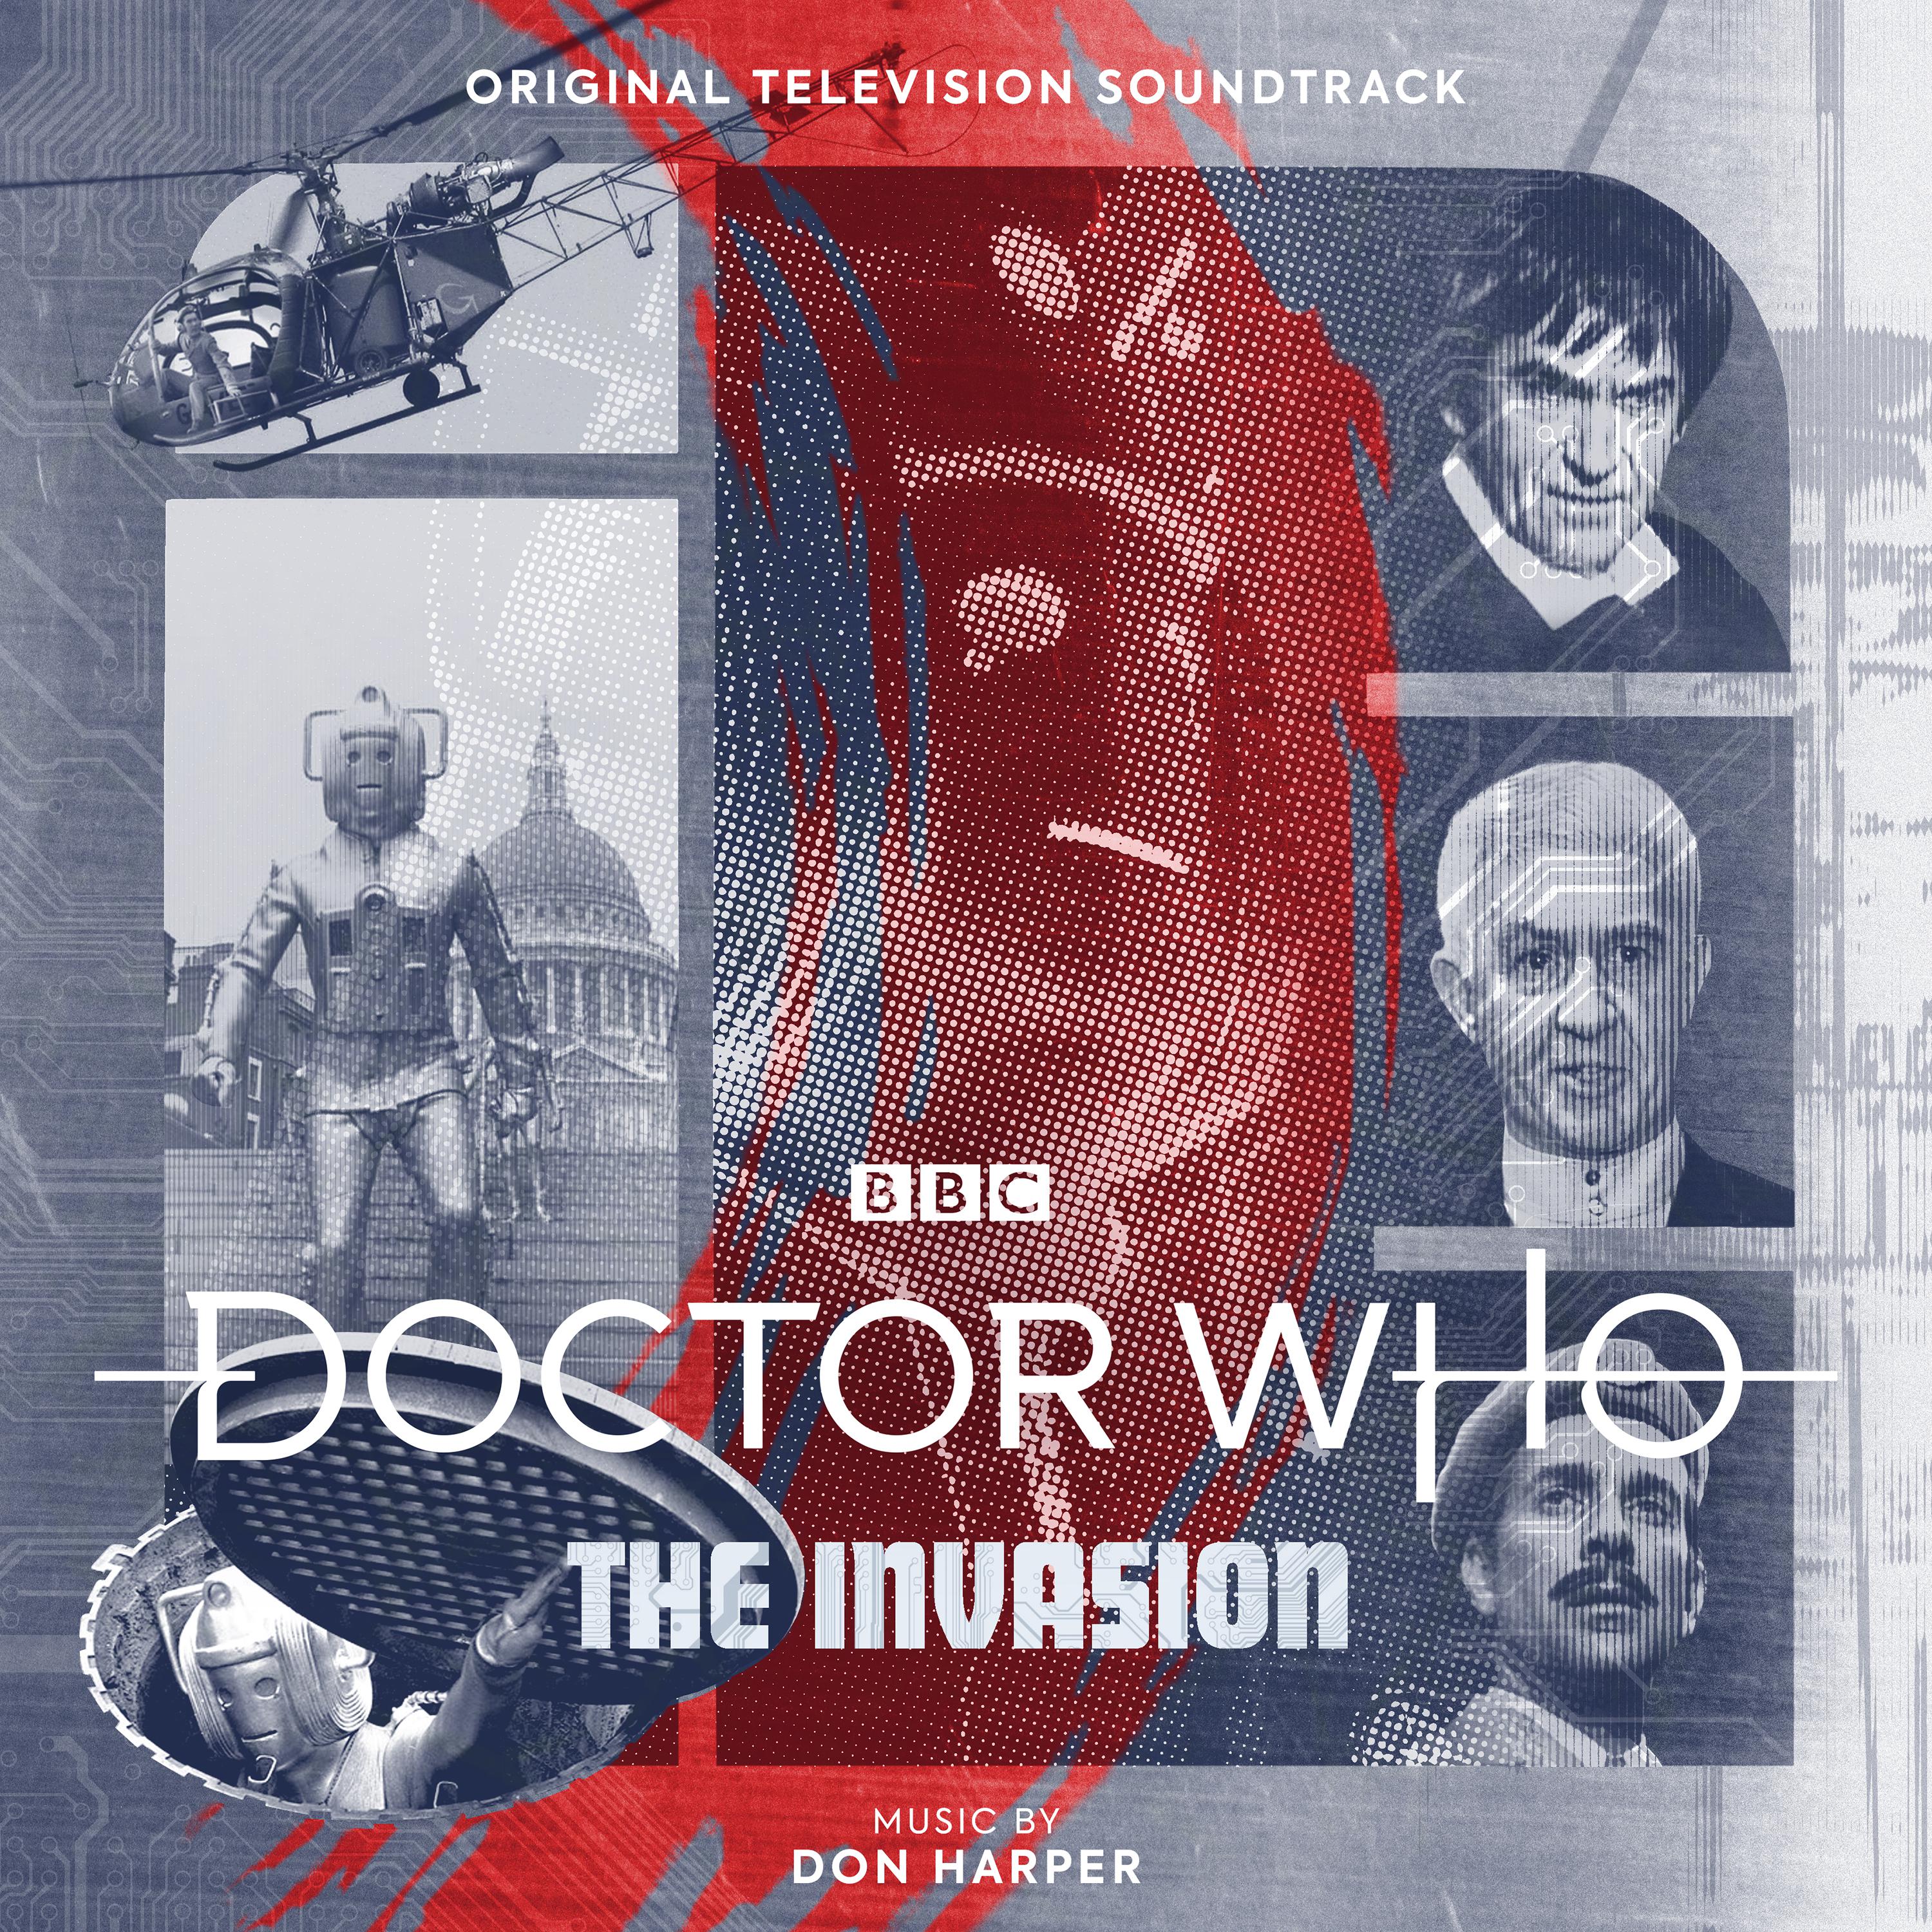 Doctor Who - The Invasion (Original Television Soundtrack)